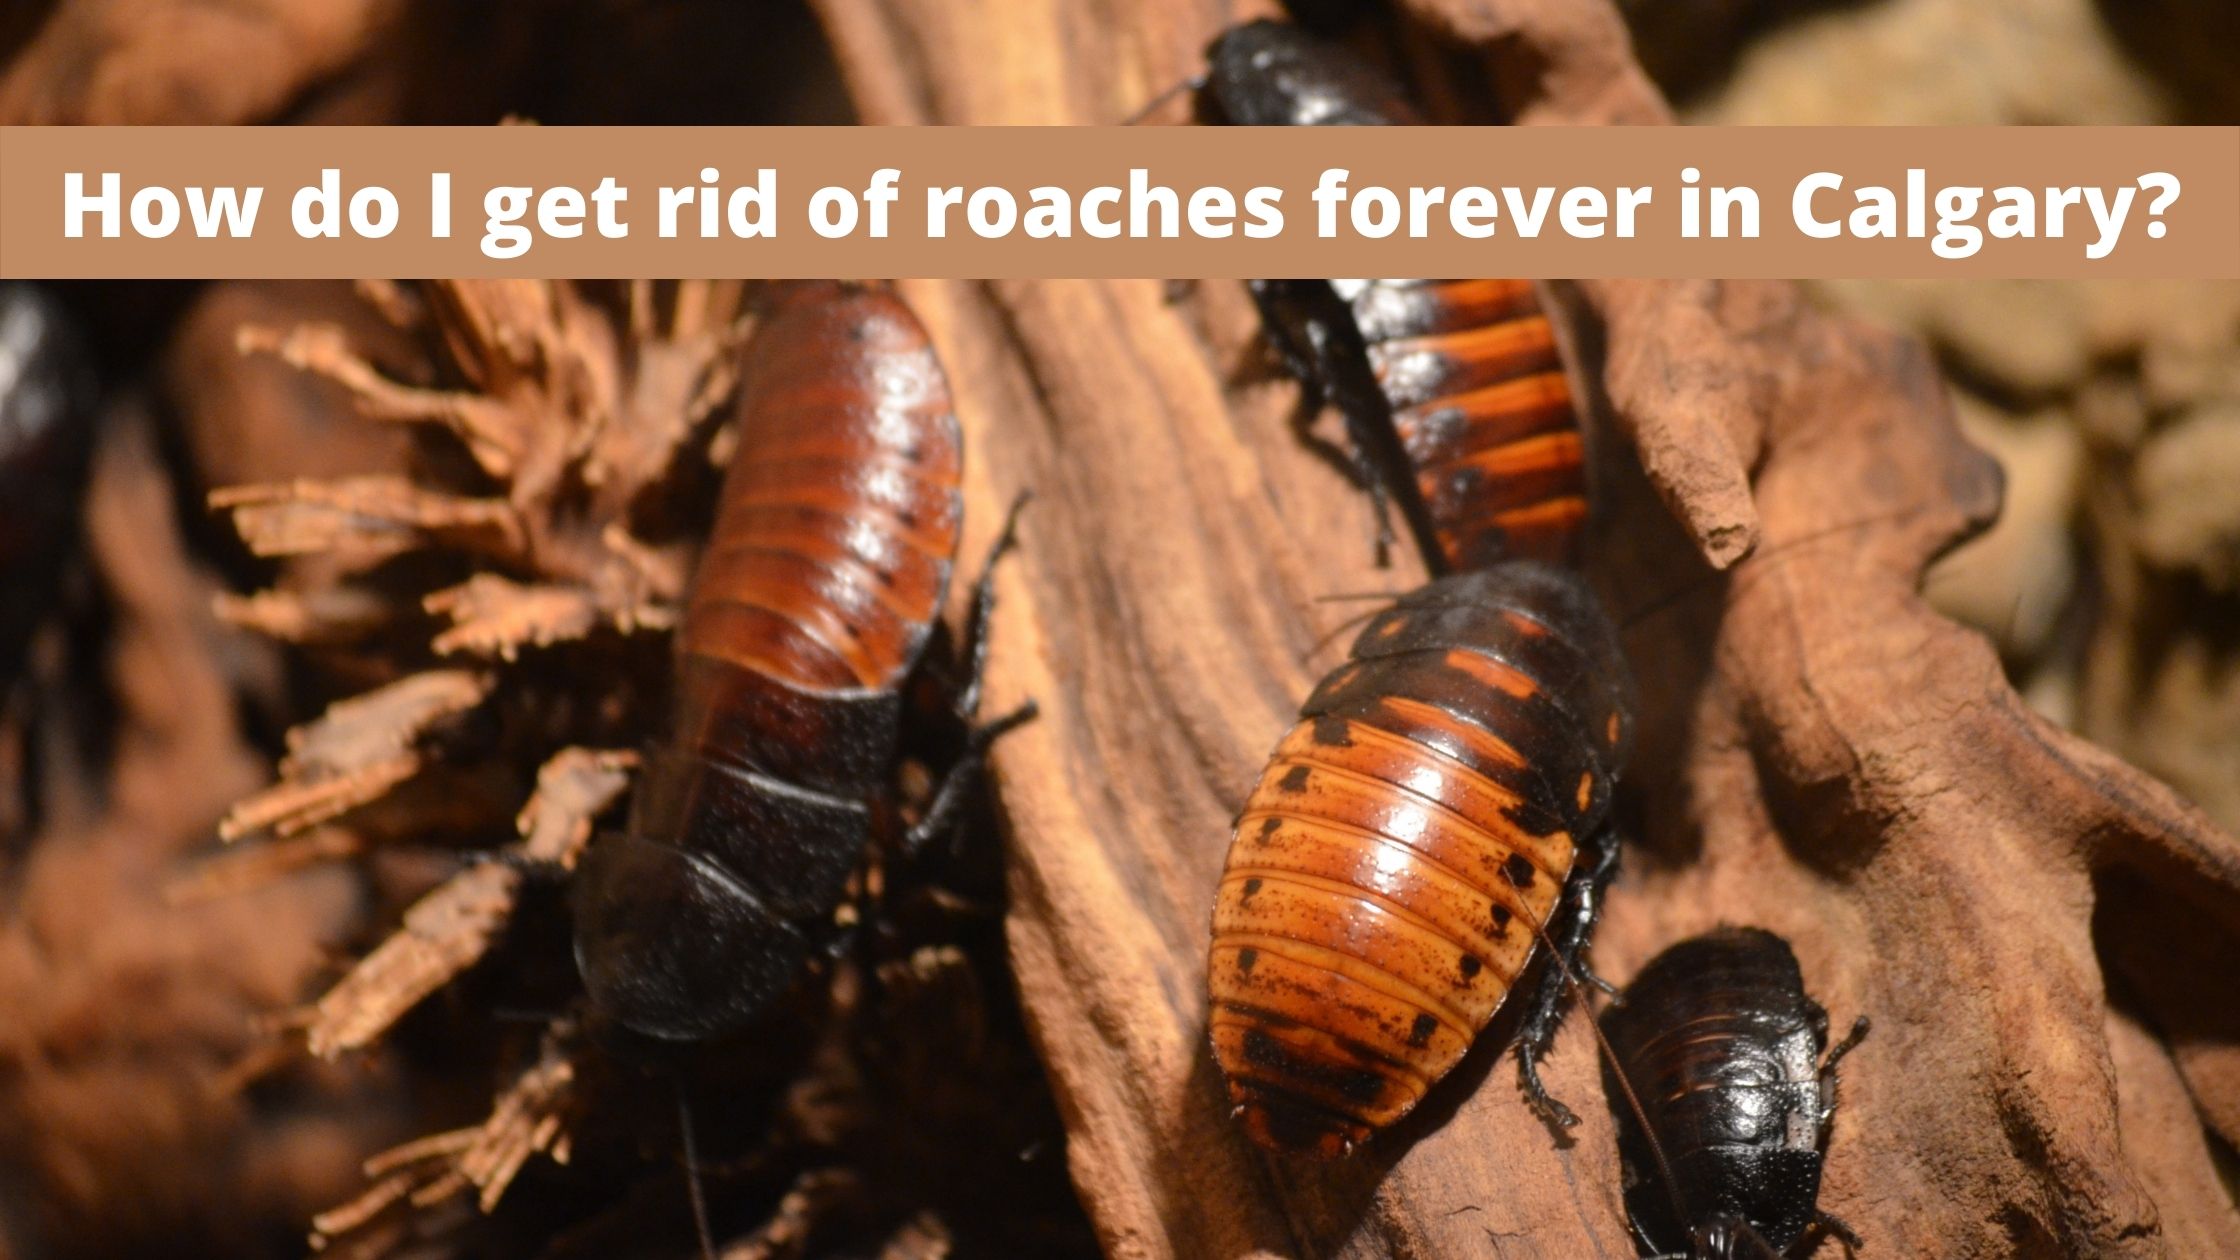 How do I get rid of roaches forever in Calgary?